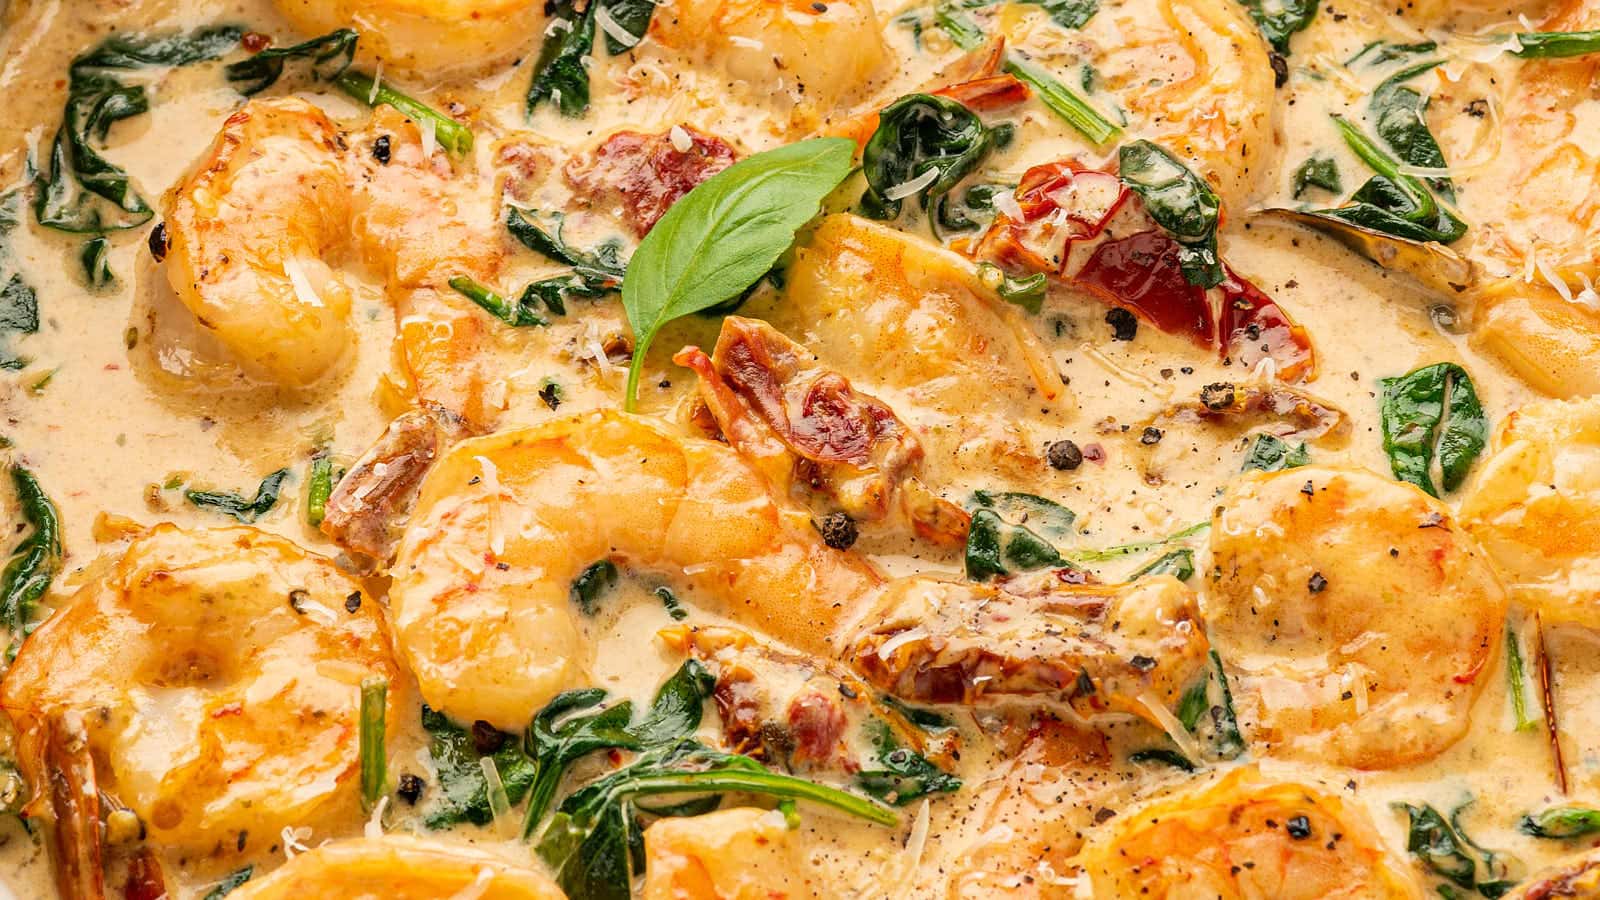 Tuscan Shrimp recipe by Cheerful Cook.